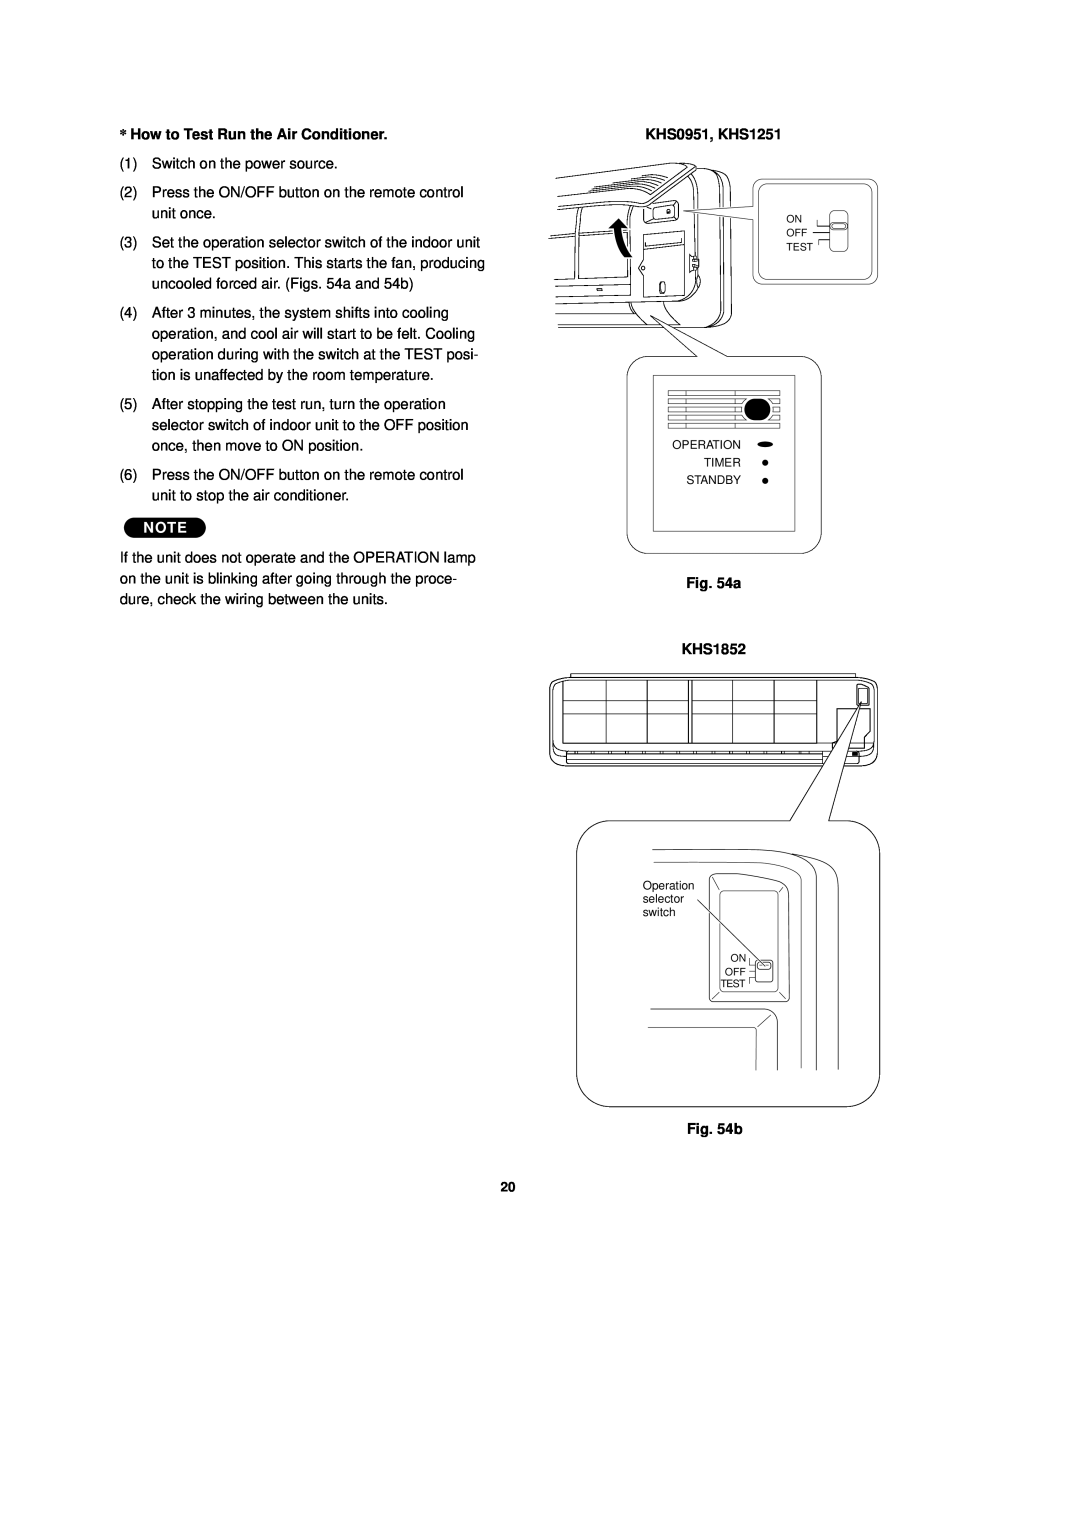 Sanyo CH1251, CH0951 installation instructions How to Test Run the Air Conditioner, a KHS1852, b, KHS0951, KHS1251 